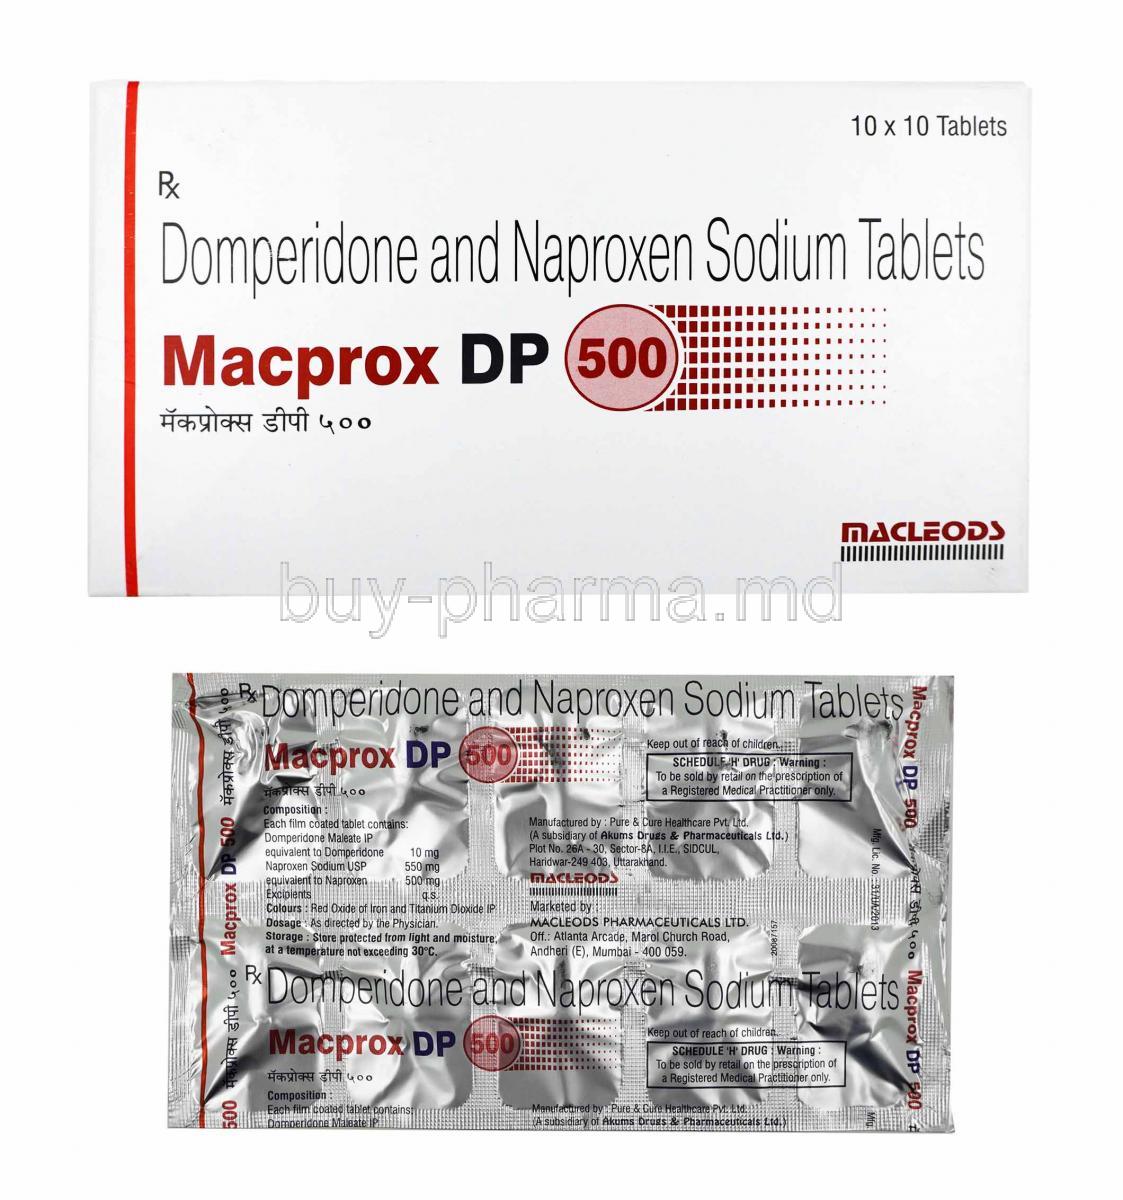 Macprox DP, Naproxen and Domperidone 500mg box and tablets